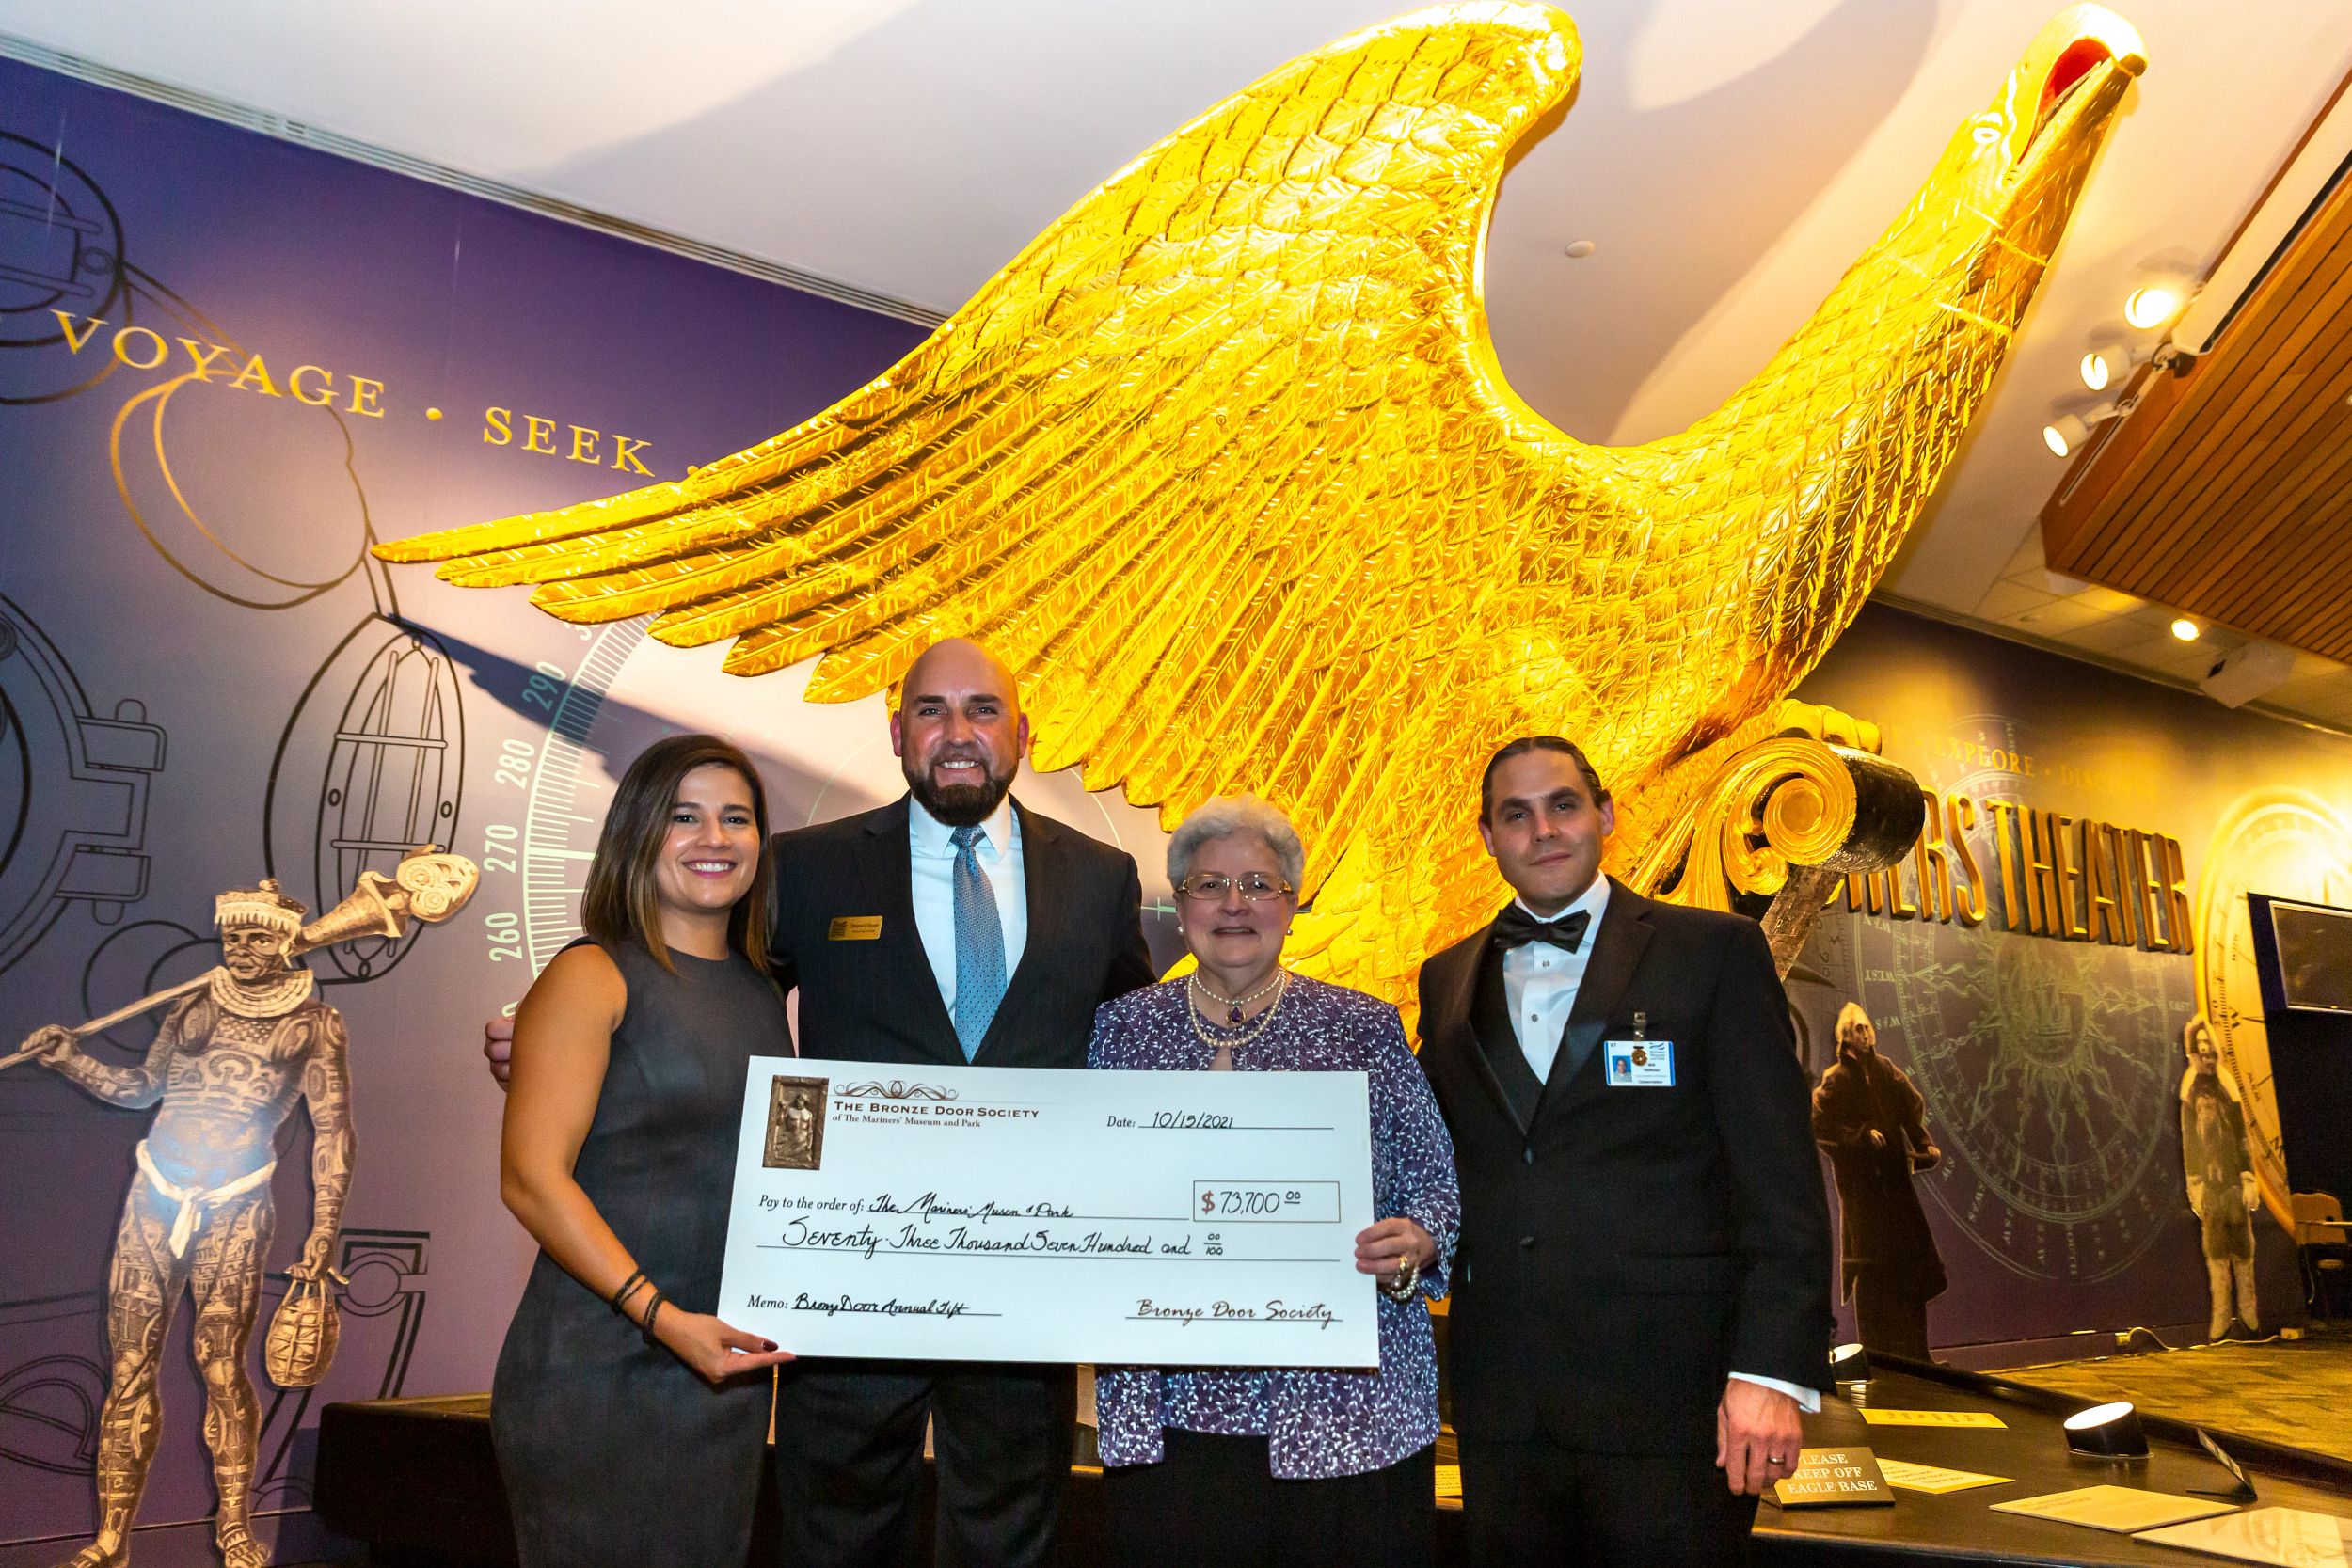 Bronze Door Society Member Cynthia Katz presents a check to Mariners' team members in front of the golden Lancaster eagle figurehead.